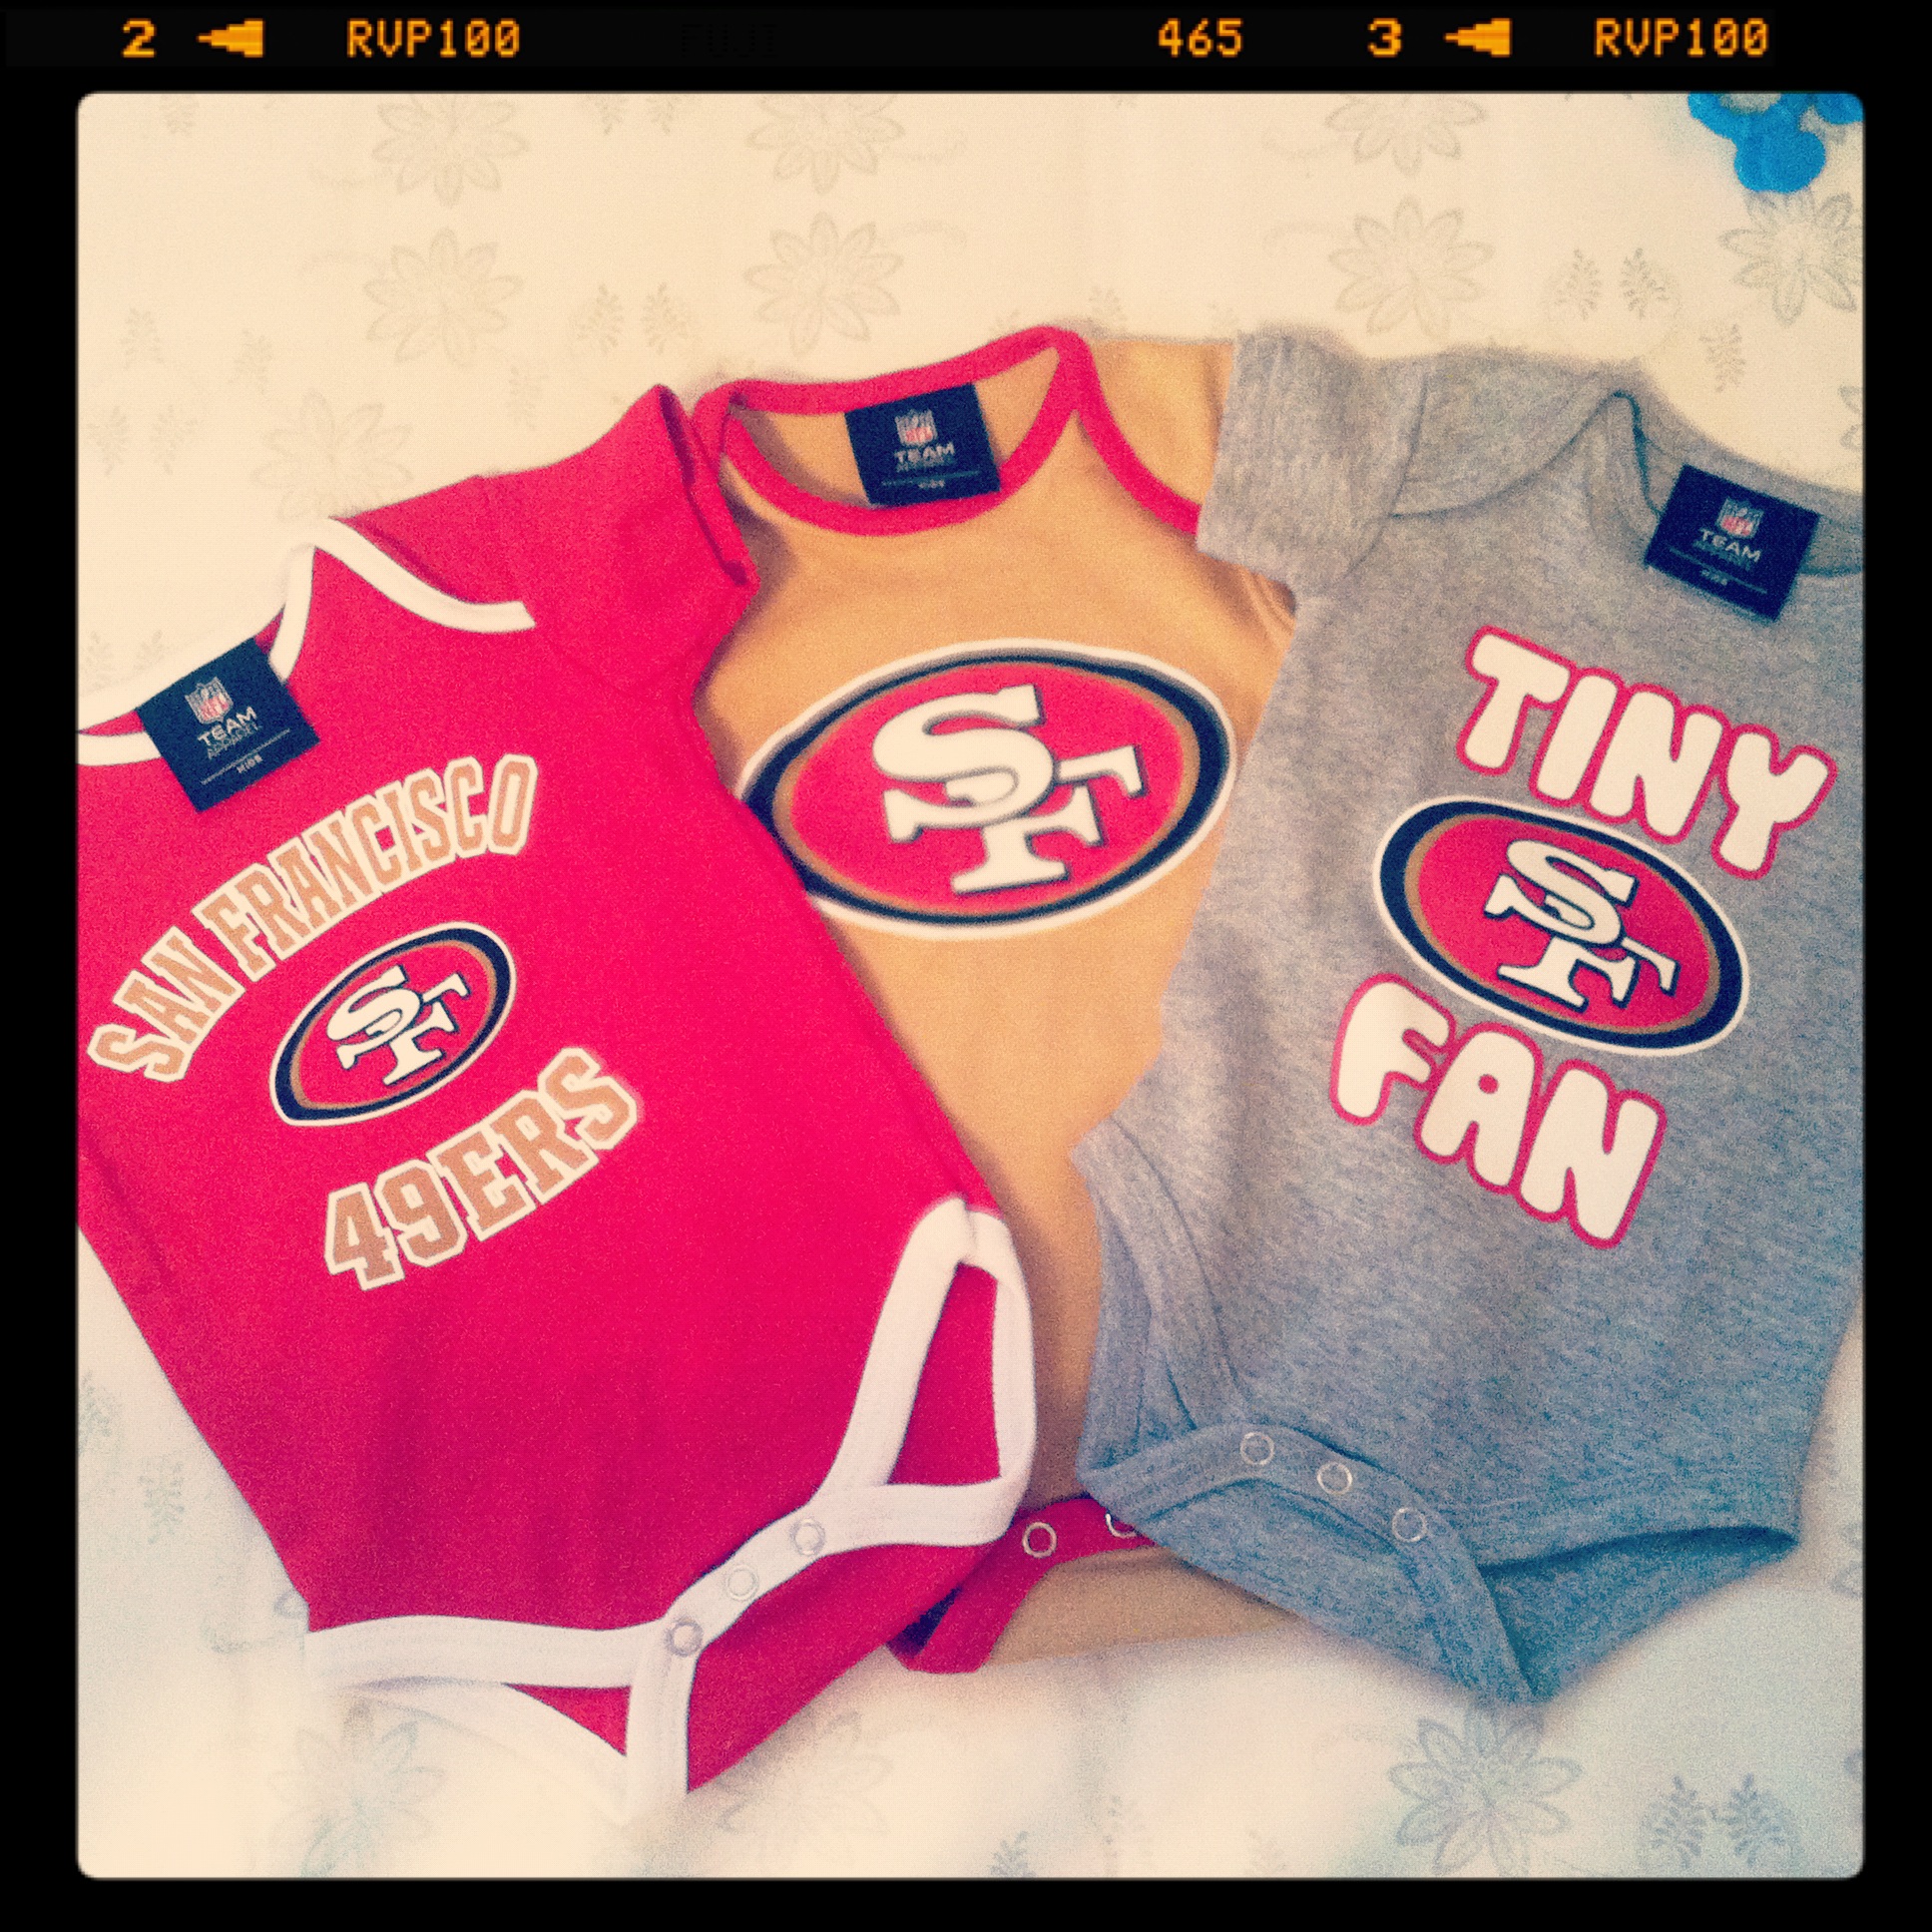 baby 49ers jersey